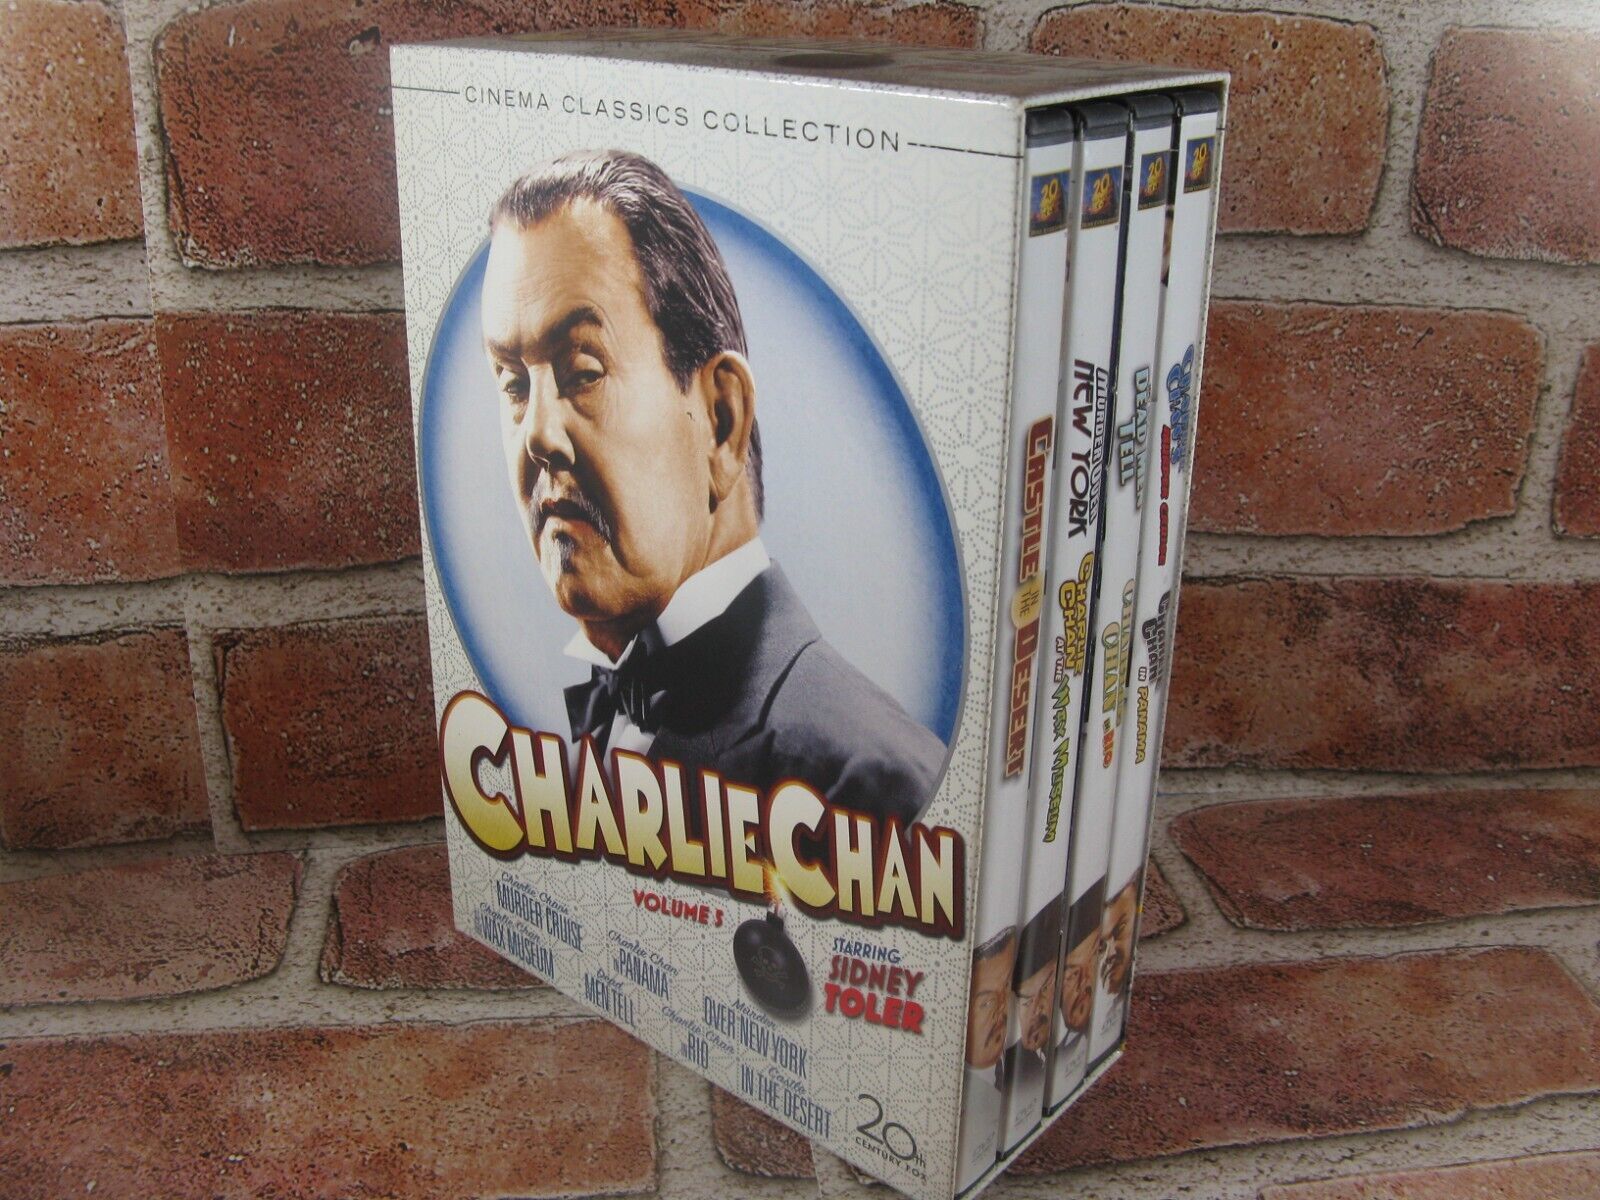 Primary image for Charlie Chan Collection Volume 5 DVD Sidney Toler Cinema Classics 4 Disc Set